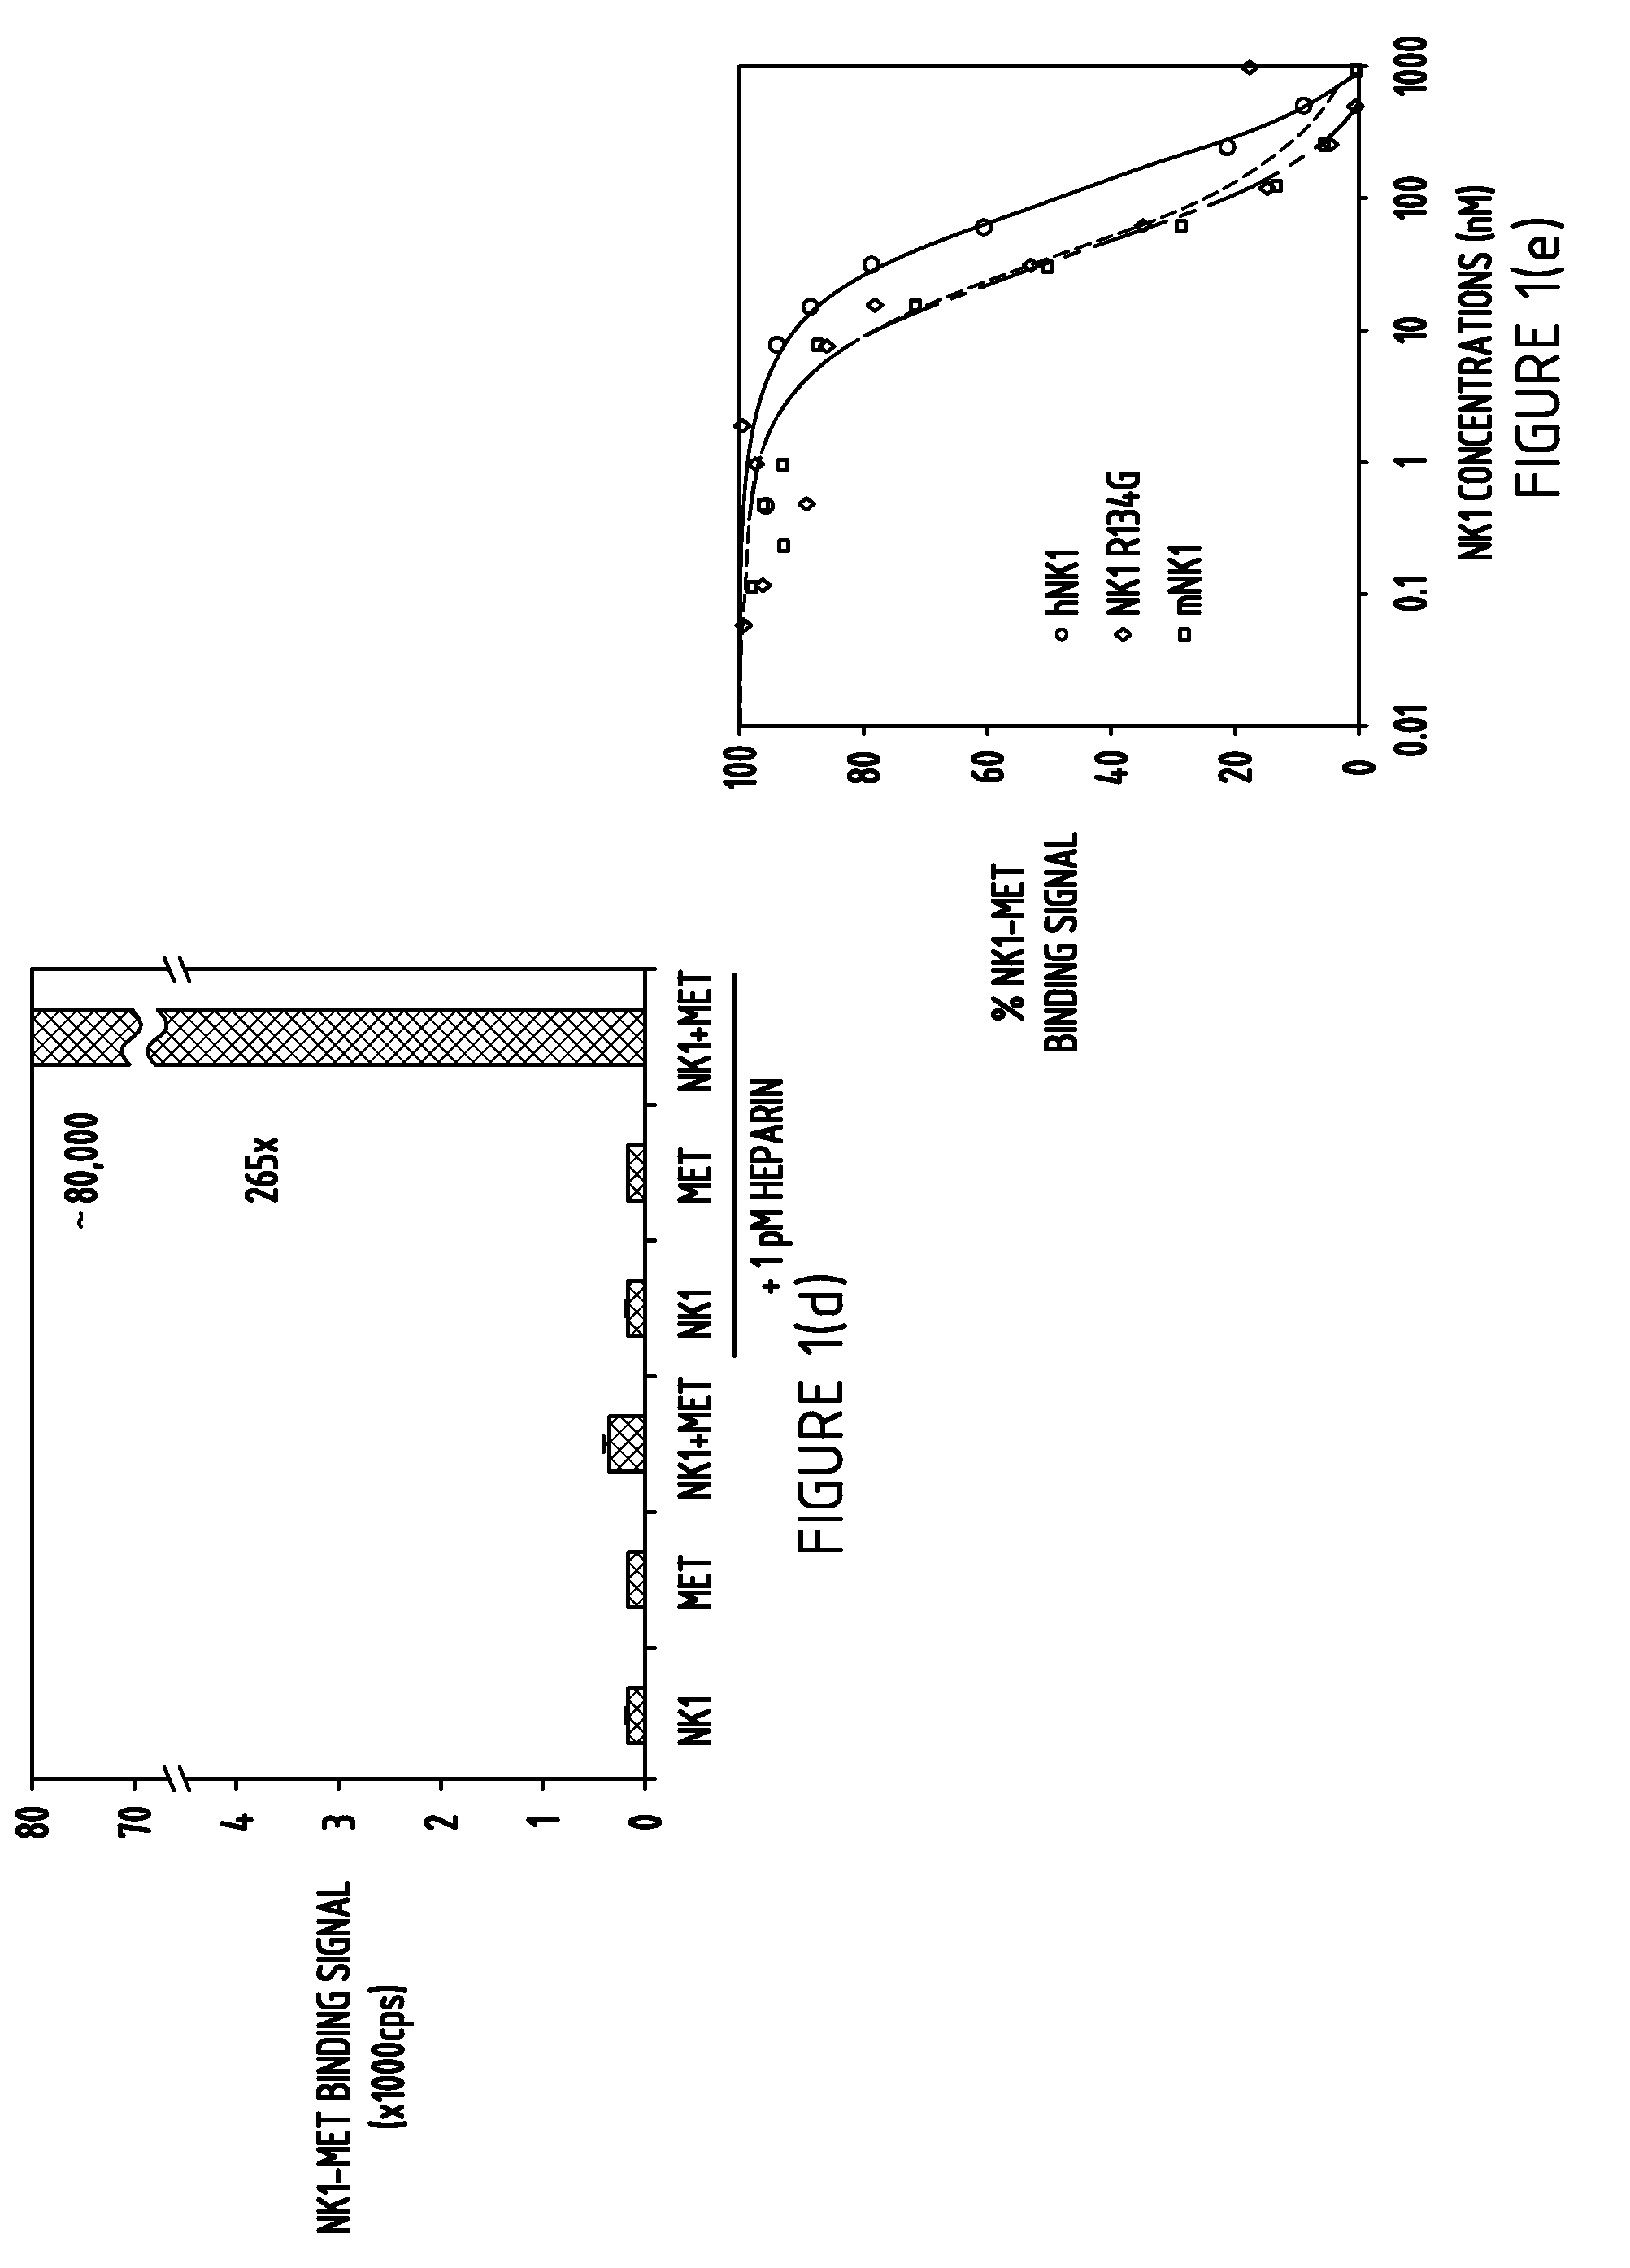 Nk1-based polypeptides and related methods